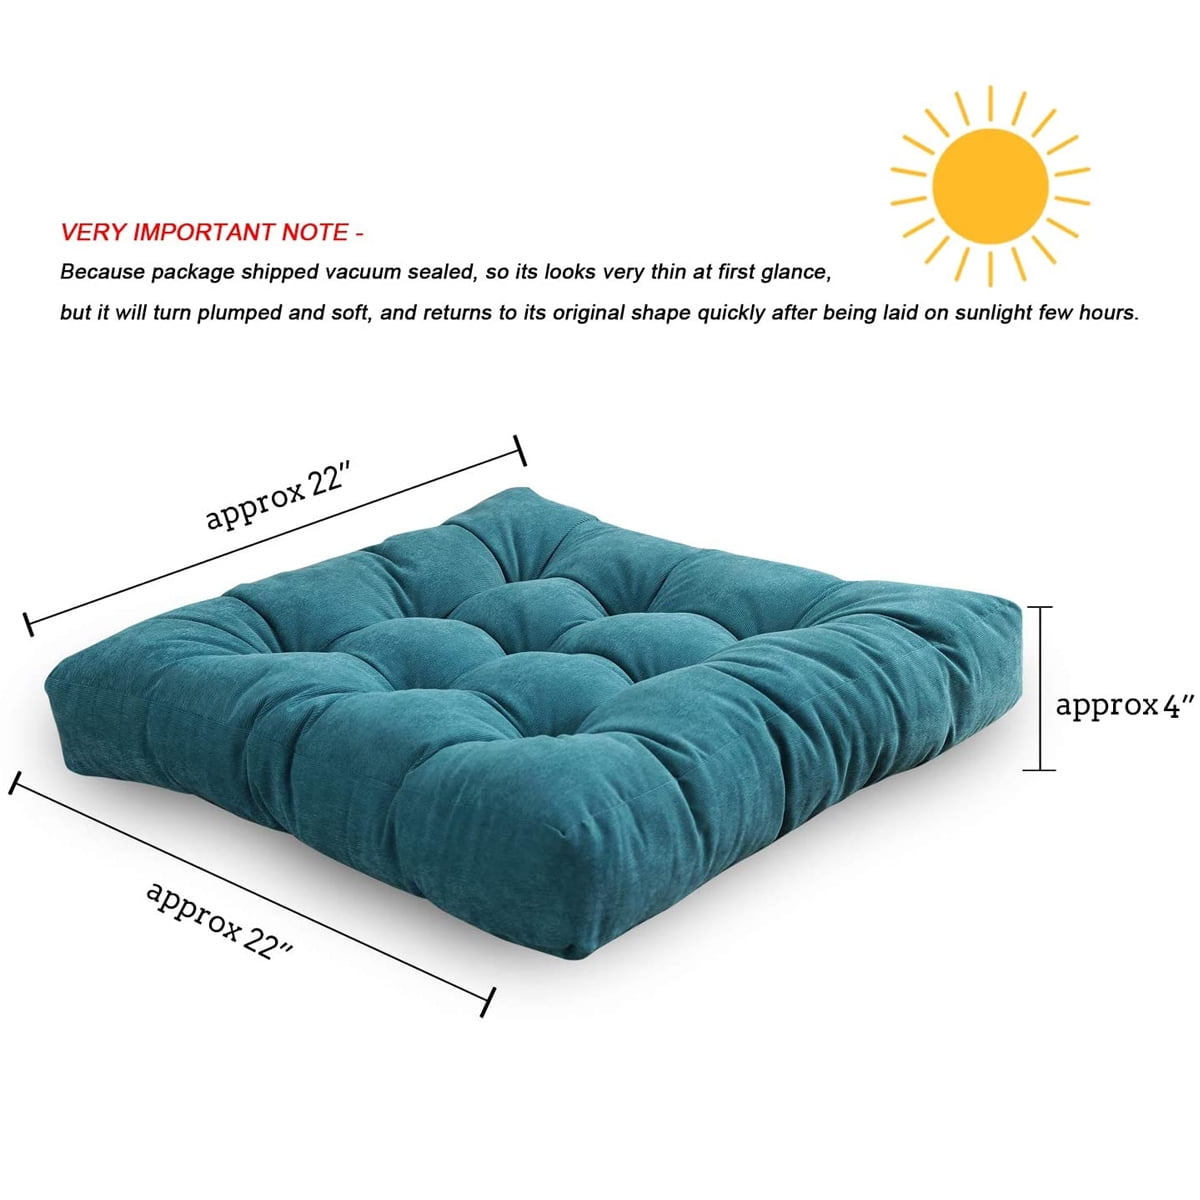 Extra Thick Foam Cushion, Large by LivingSURE™